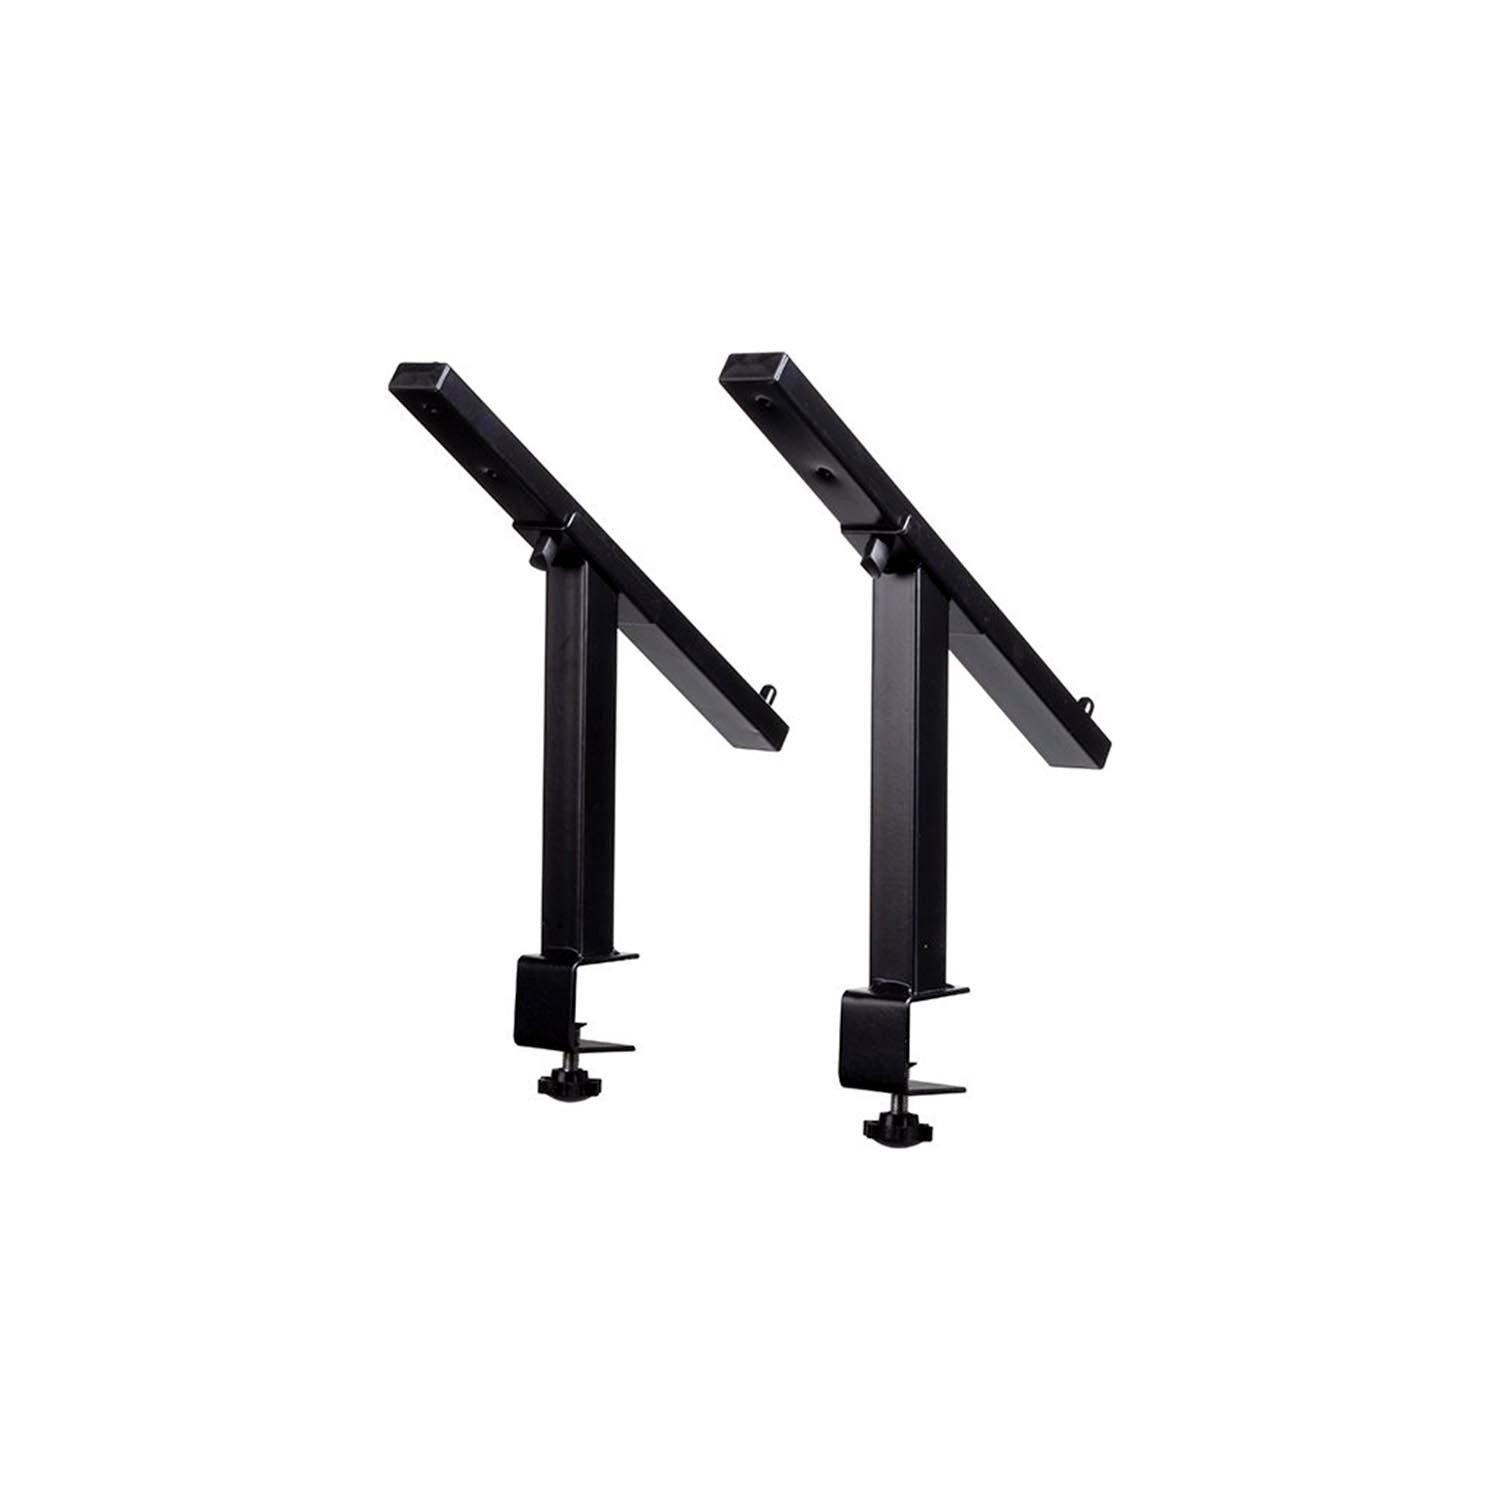 B-Stock: Headliner HL20002 La Brea Laptop Stand Brackets, Pair of Mounting Brackets with Table Clamps - Hollywood DJ